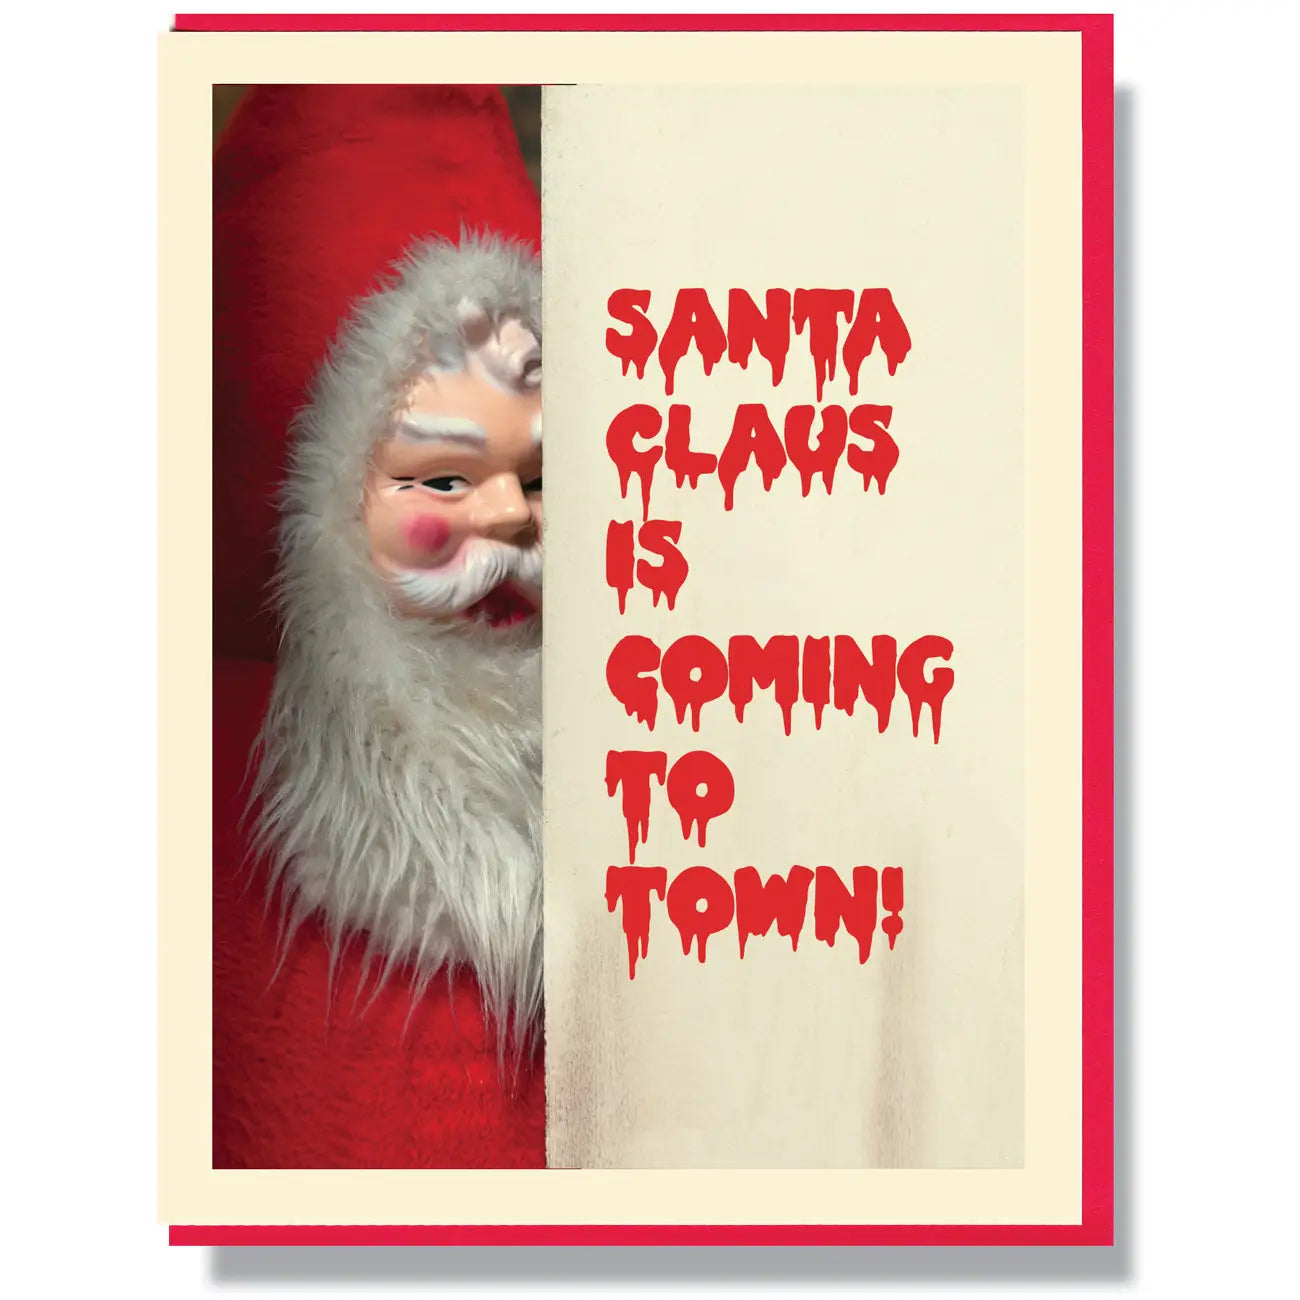 A greeting card of a scary looking Santa Claus doll and the caption “Santa Claus is Coming to Town!” in a red dripping horror movie font